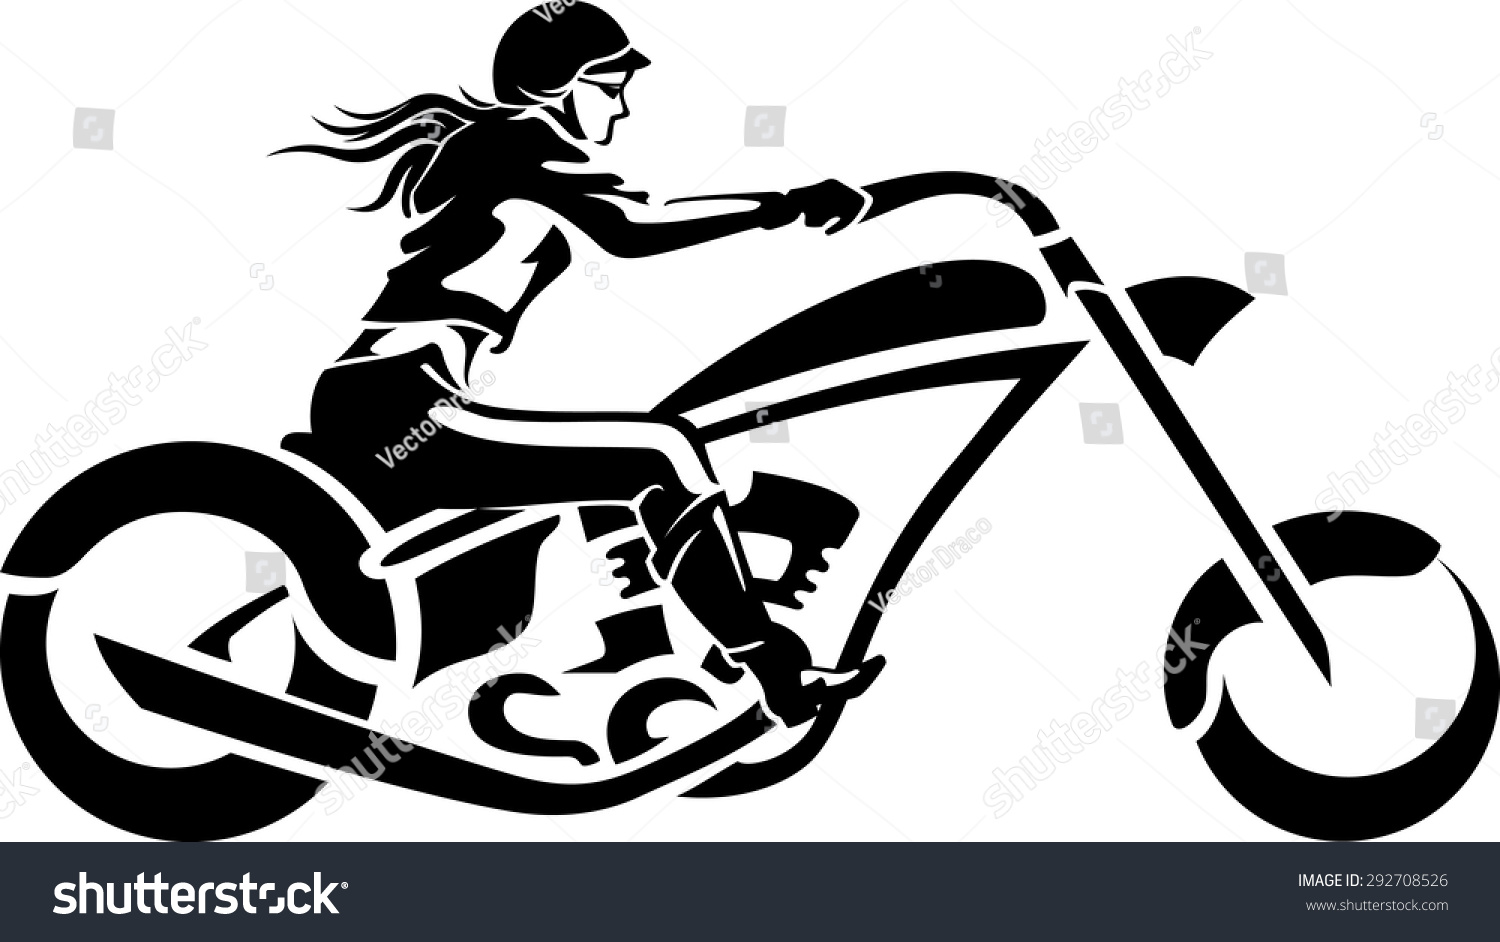 free vector motorcycle clipart - photo #47